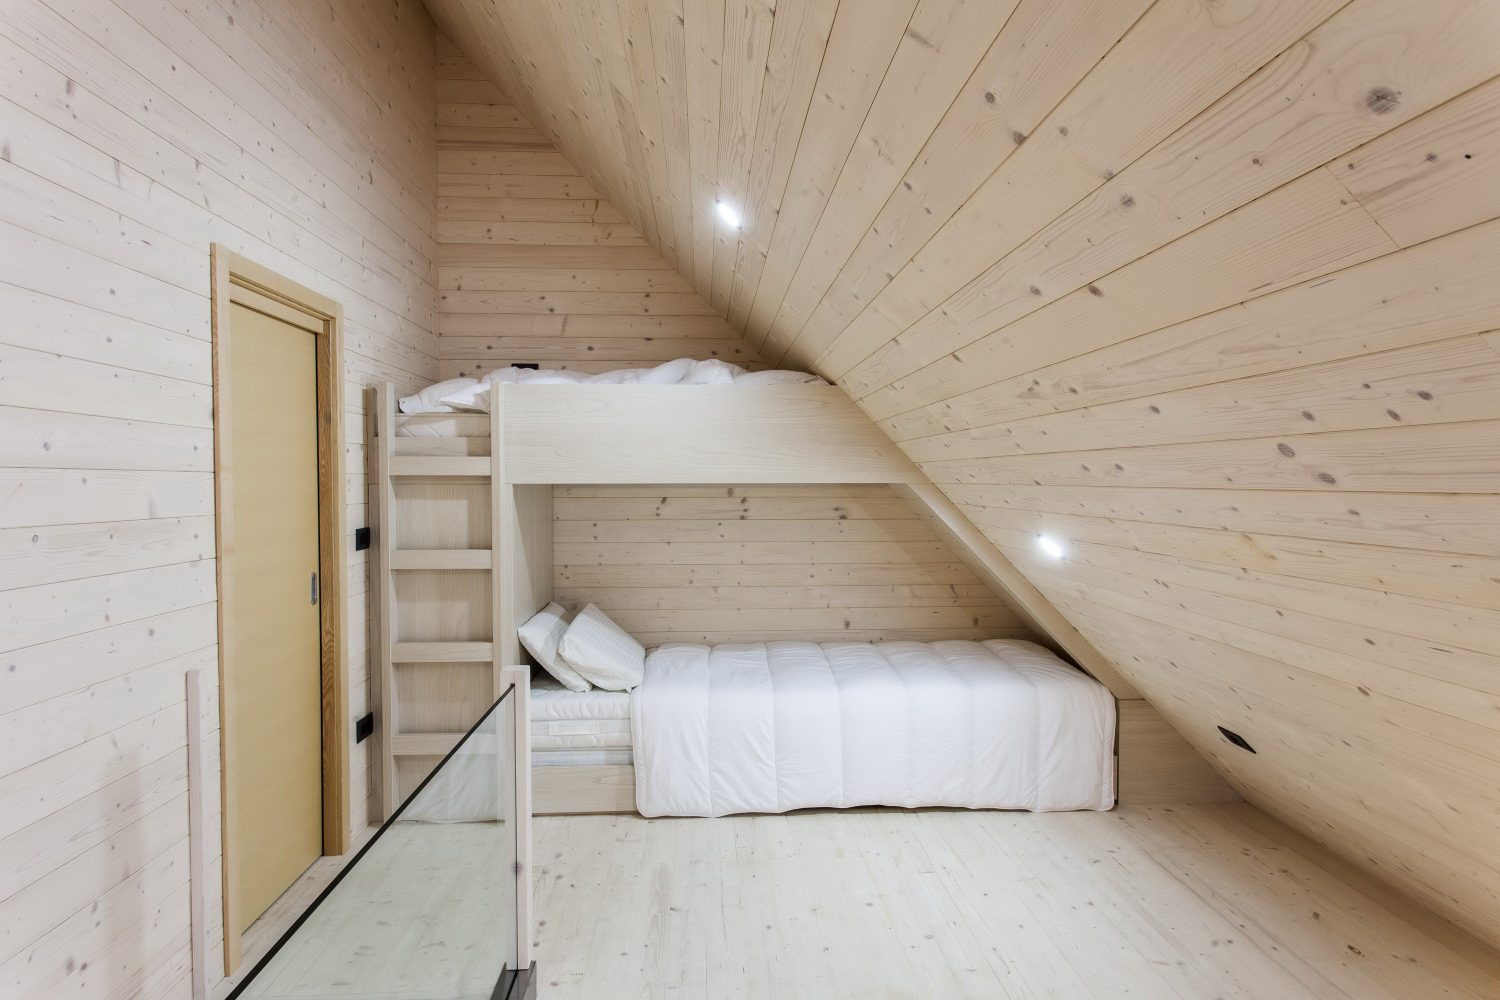 The Wooden House by Studio Pikaplus